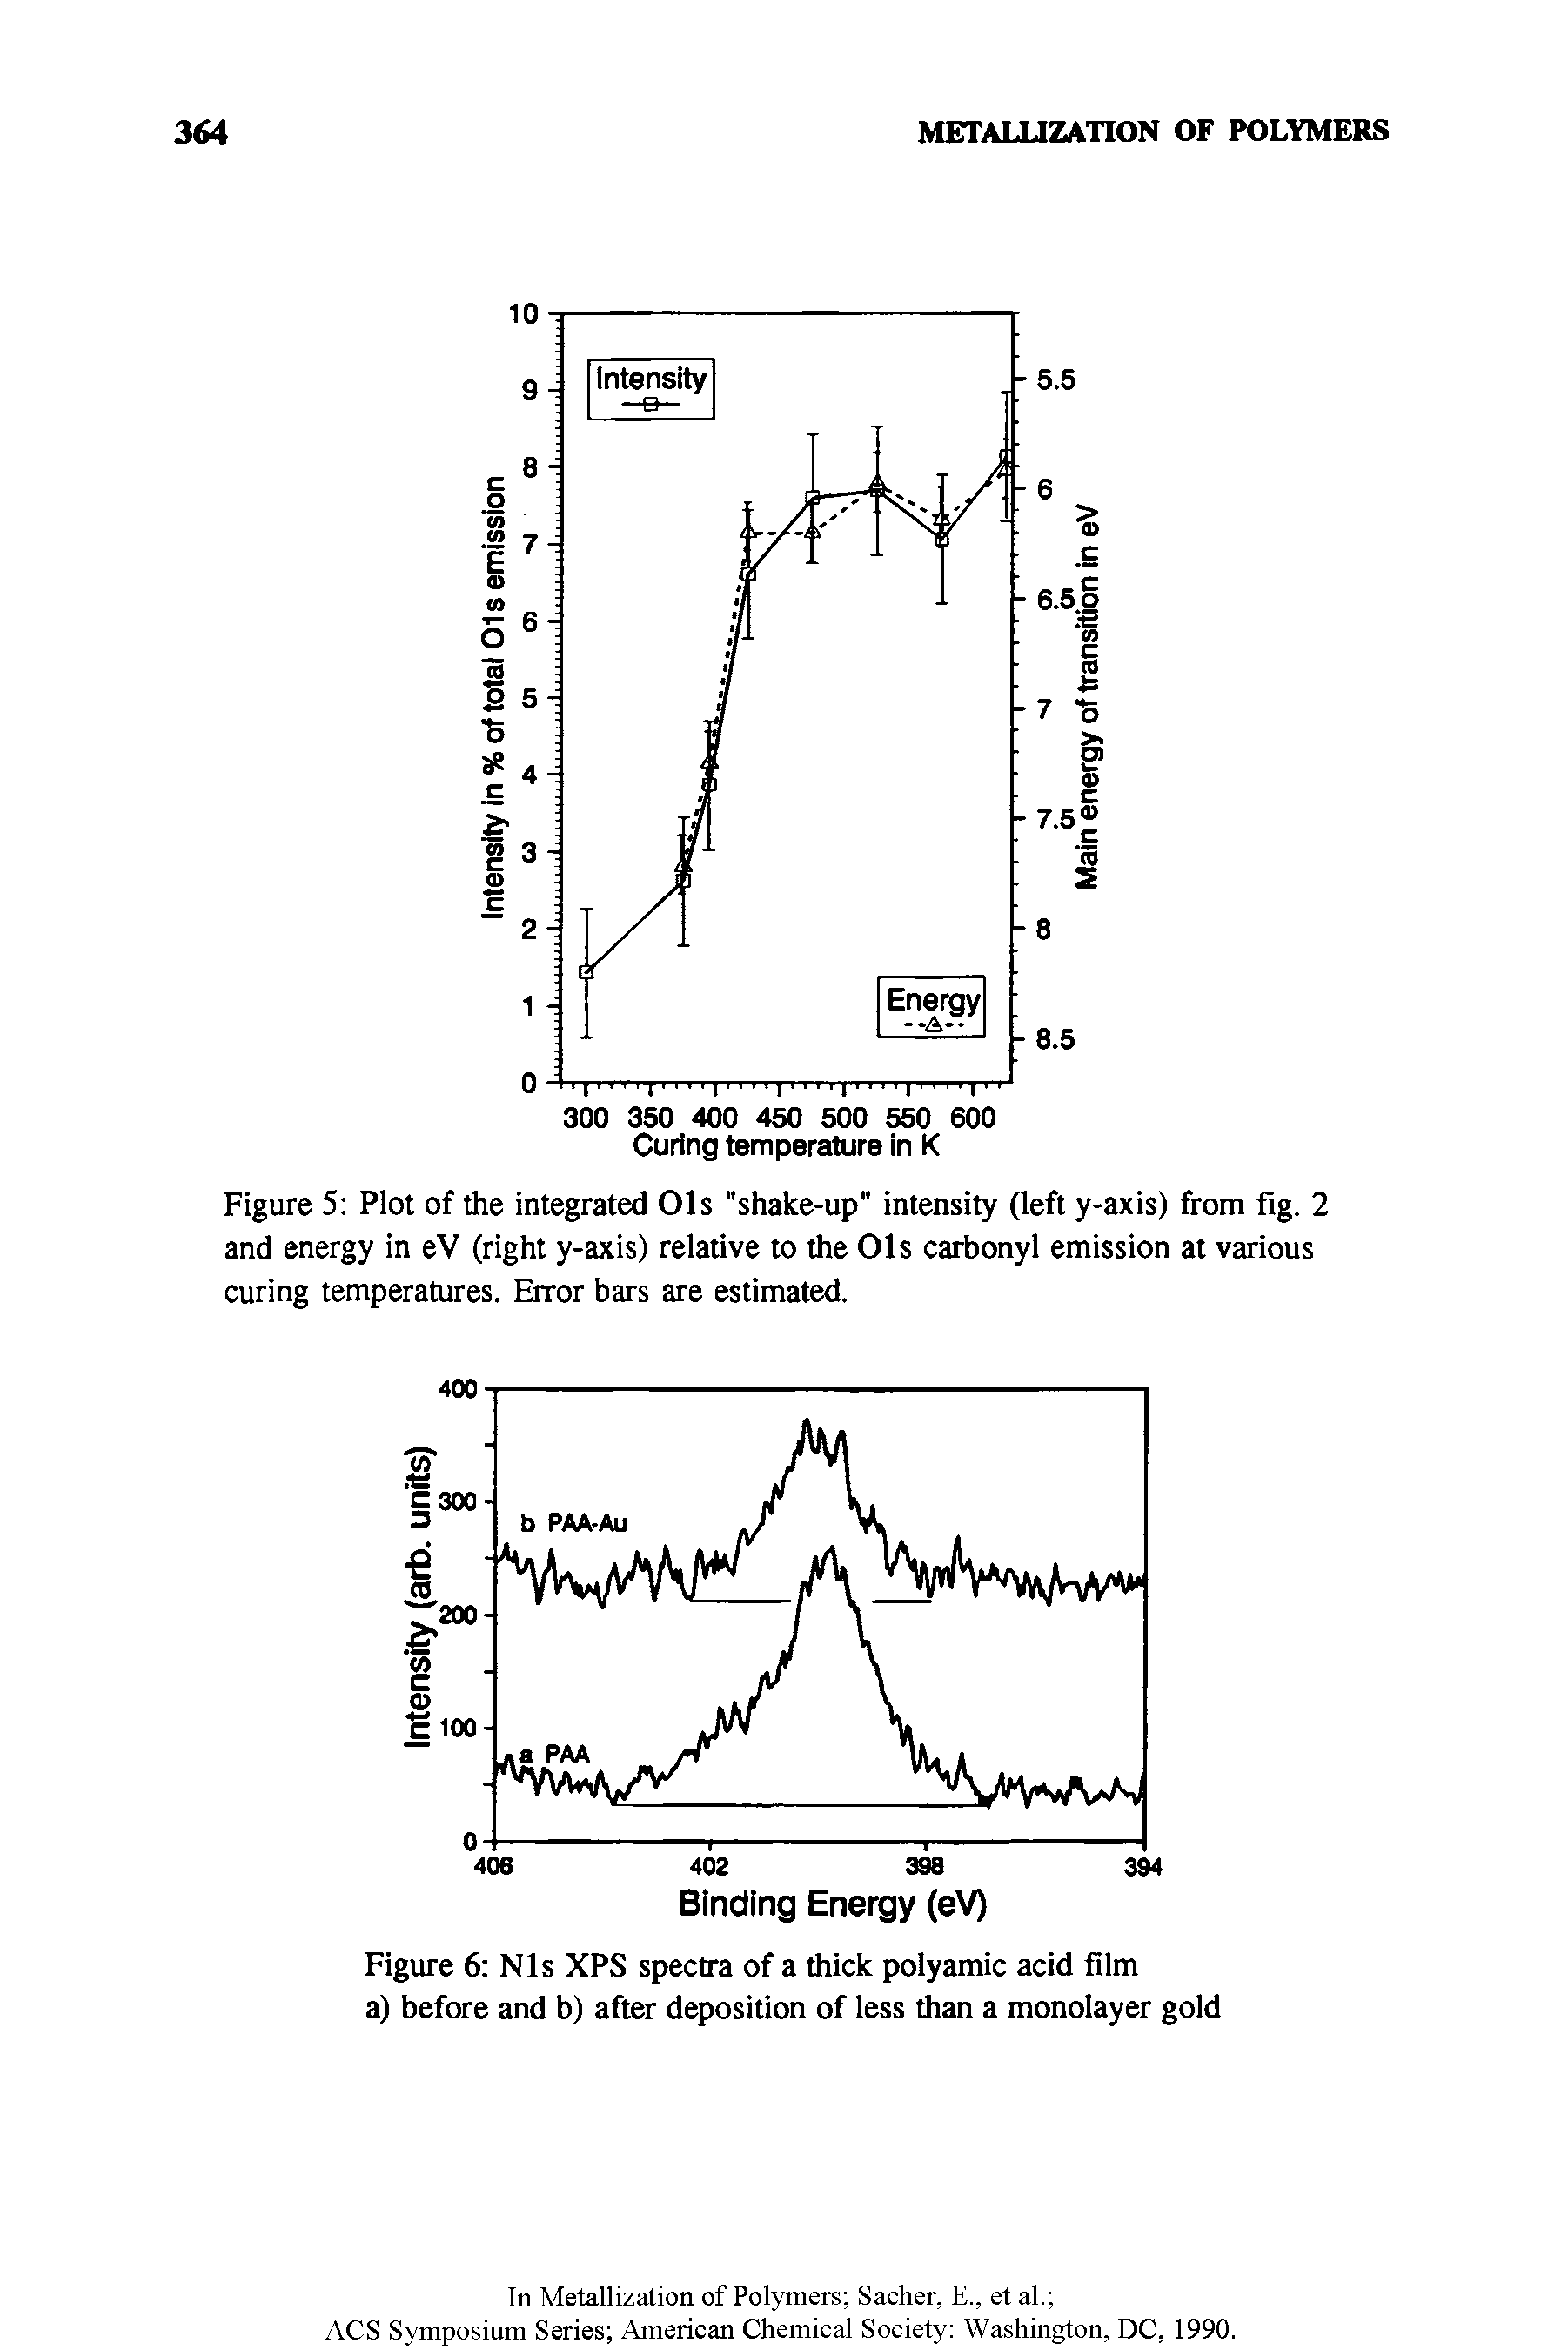 Figure 6 Nls XPS spectra of a thick polyamic acid film a) before and b) after deposition of less than a monolayer gold...